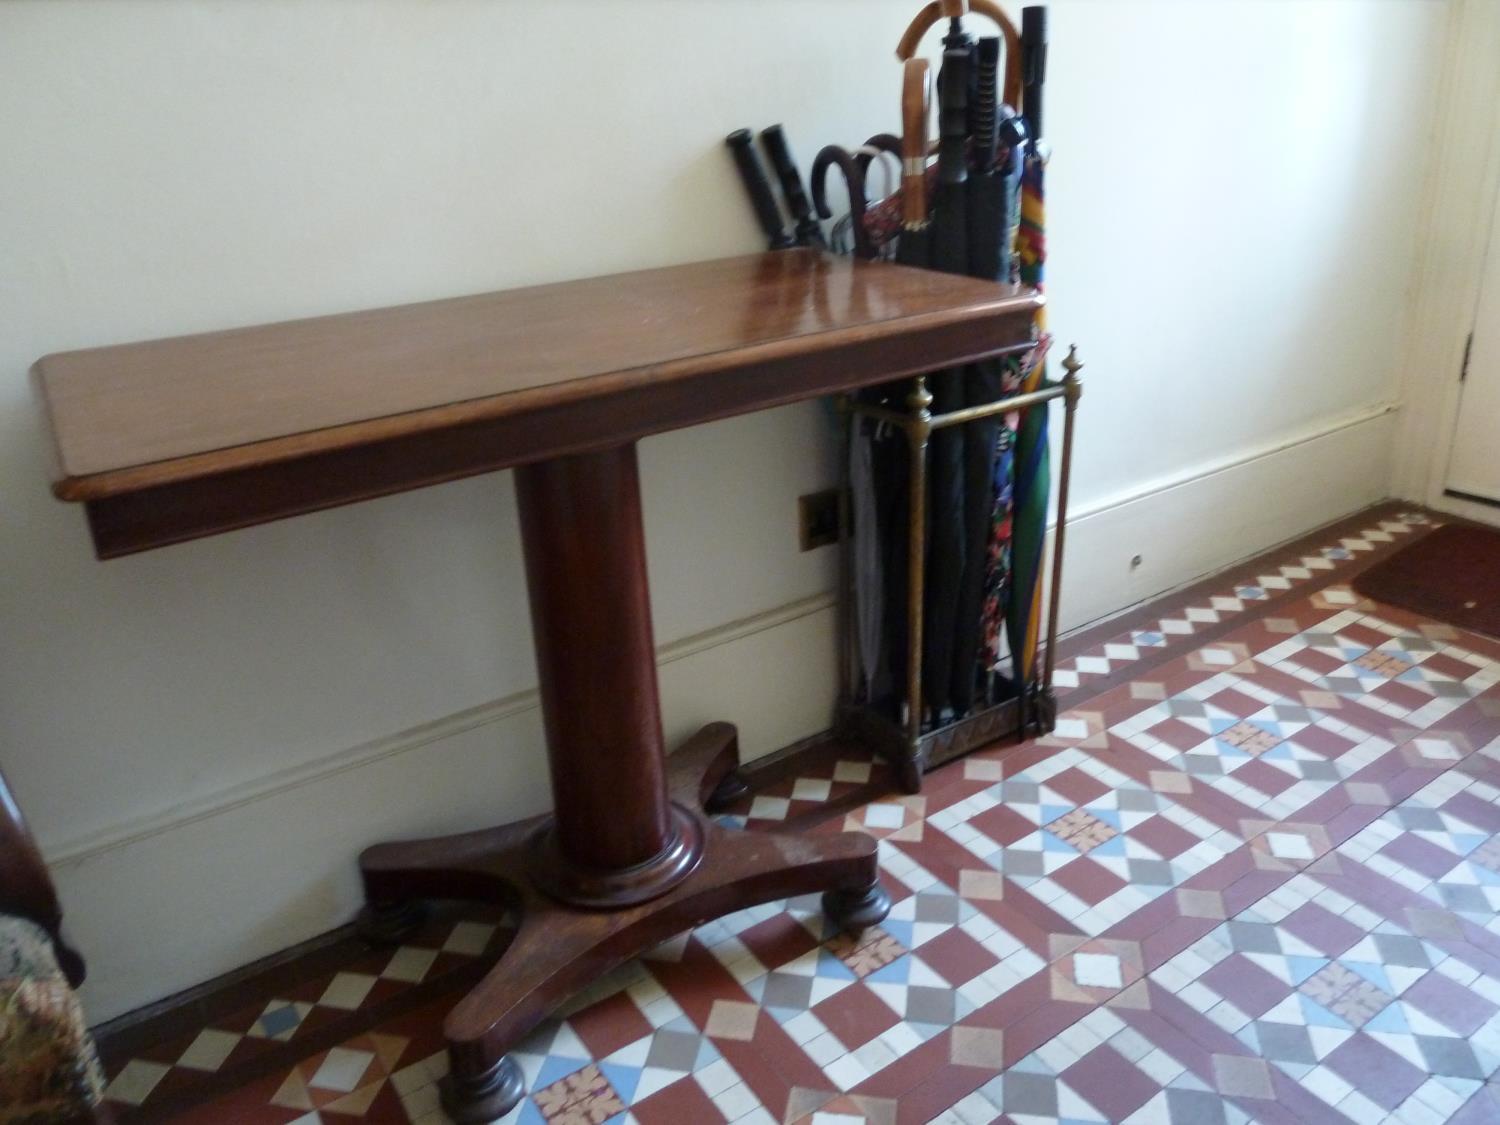 A Regency mahogany invalid or bedroom table with sliding mechanism to position over a bed, w 91 cm x